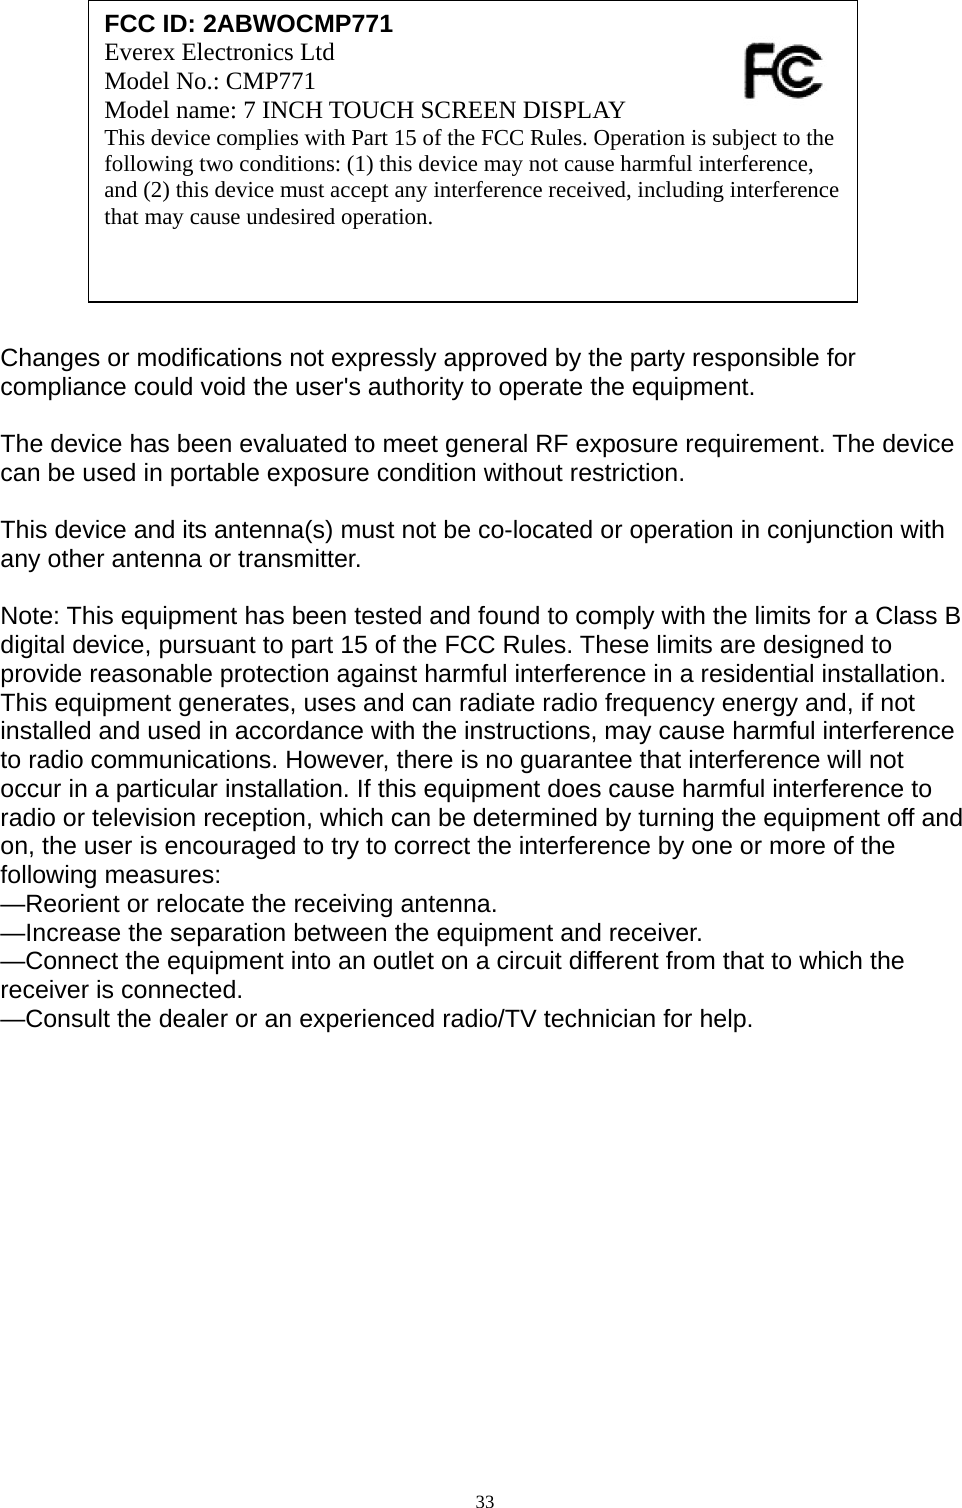               Changes or modifications not expressly approved by the party responsible for compliance could void the user&apos;s authority to operate the equipment.  The device has been evaluated to meet general RF exposure requirement. The device  can be used in portable exposure condition without restriction.    This device and its antenna(s) must not be co-located or operation in conjunction with any other antenna or transmitter.  Note: This equipment has been tested and found to comply with the limits for a Class B digital device, pursuant to part 15 of the FCC Rules. These limits are designed to provide reasonable protection against harmful interference in a residential installation. This equipment generates, uses and can radiate radio frequency energy and, if not installed and used in accordance with the instructions, may cause harmful interference to radio communications. However, there is no guarantee that interference will not occur in a particular installation. If this equipment does cause harmful interference to radio or television reception, which can be determined by turning the equipment off and on, the user is encouraged to try to correct the interference by one or more of the following measures: —Reorient or relocate the receiving antenna. —Increase the separation between the equipment and receiver. —Connect the equipment into an outlet on a circuit different from that to which the receiver is connected. —Consult the dealer or an experienced radio/TV technician for help.   FCC ID: 2ABWOCMP771 Everex Electronics Ltd   Model No.: CMP771   Model name: 7 INCH TOUCH SCREEN DISPLAY This device complies with Part 15 of the FCC Rules. Operation is subject to the following two conditions: (1) this device may not cause harmful interference, and (2) this device must accept any interference received, including interference that may cause undesired operation.   33  